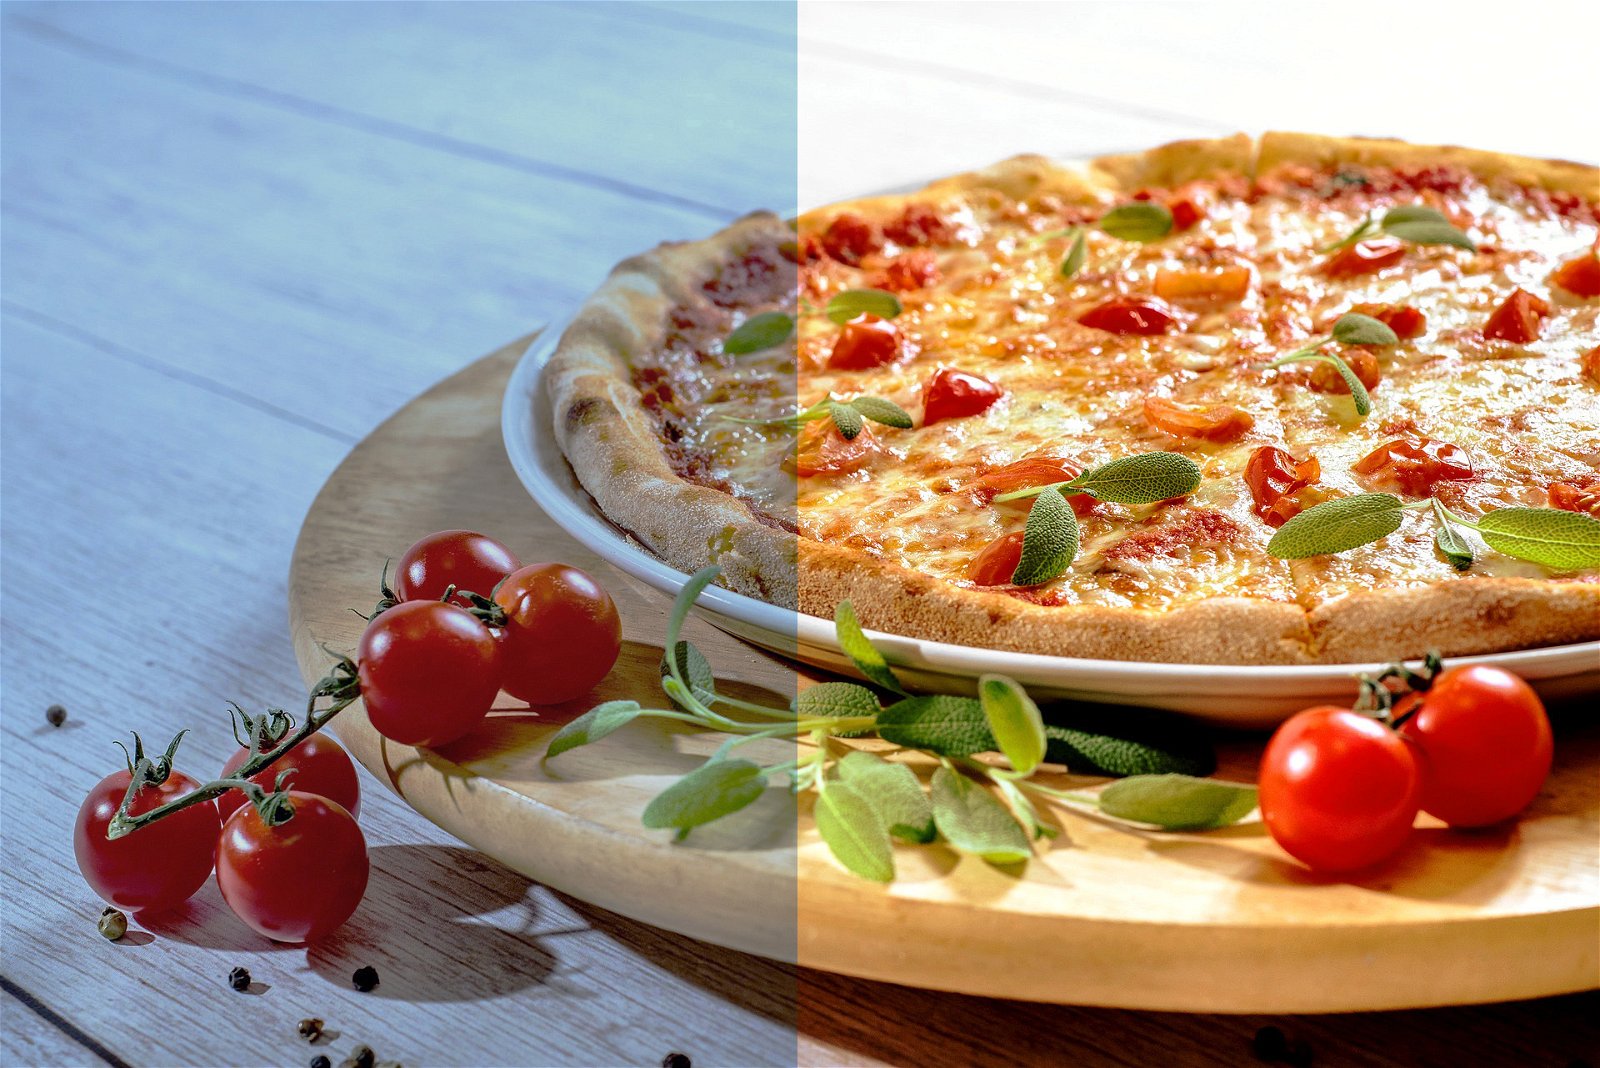 A before and after editing food photography in Photoshop screenshot